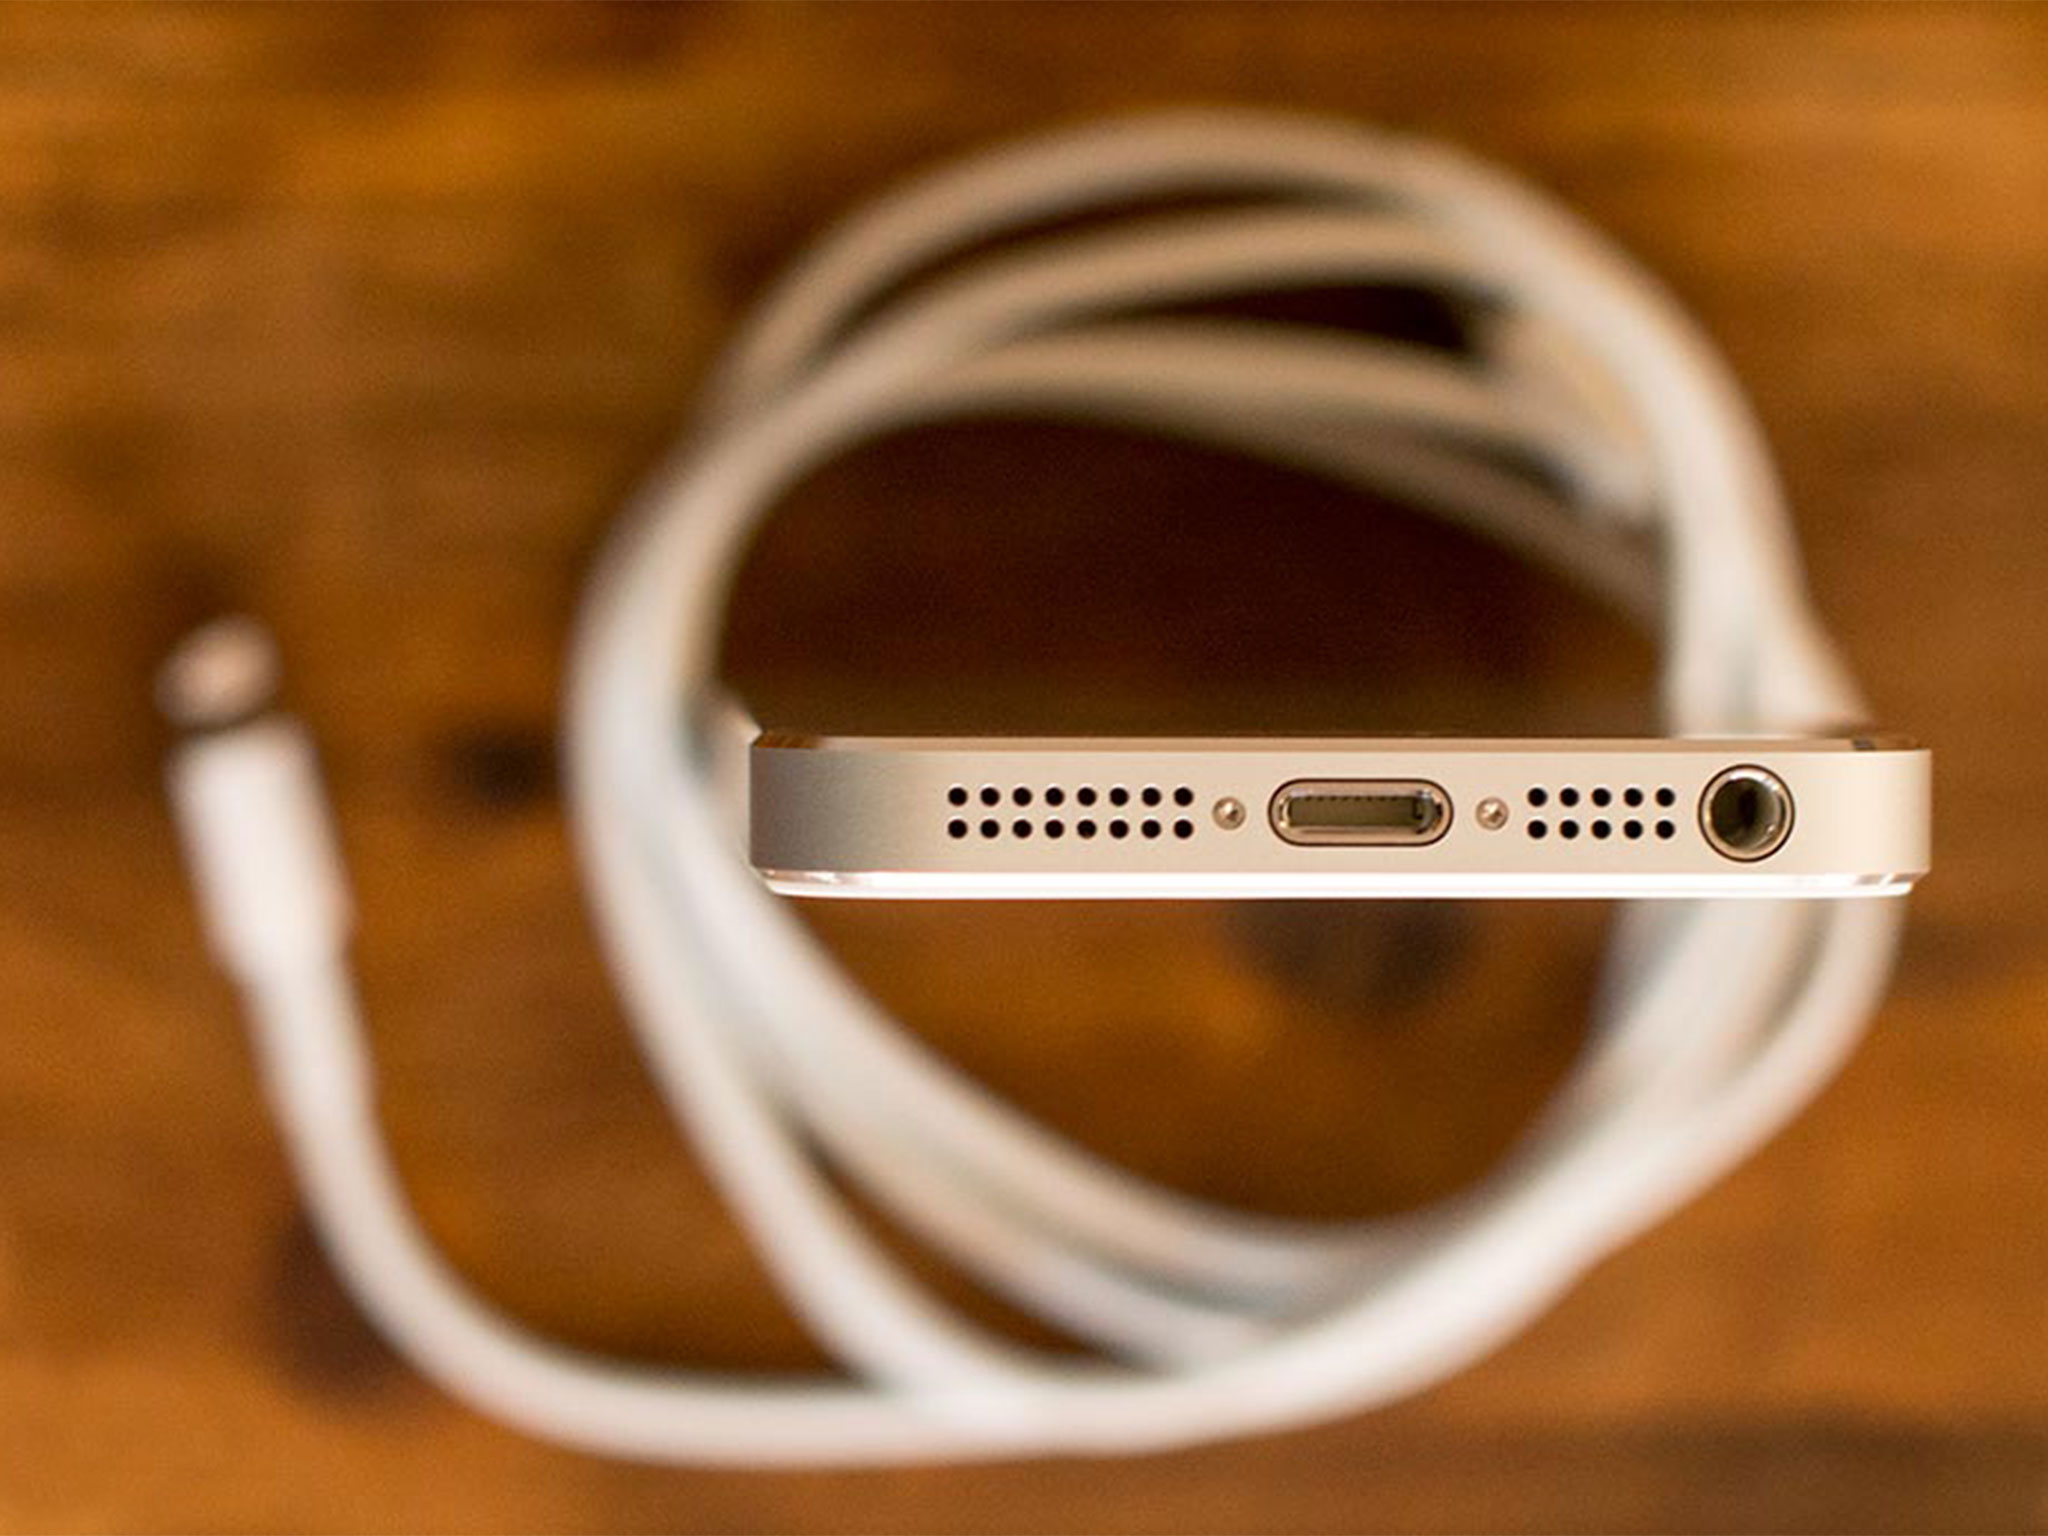 Would it kill Apple to include a longer lightning cable in the box?